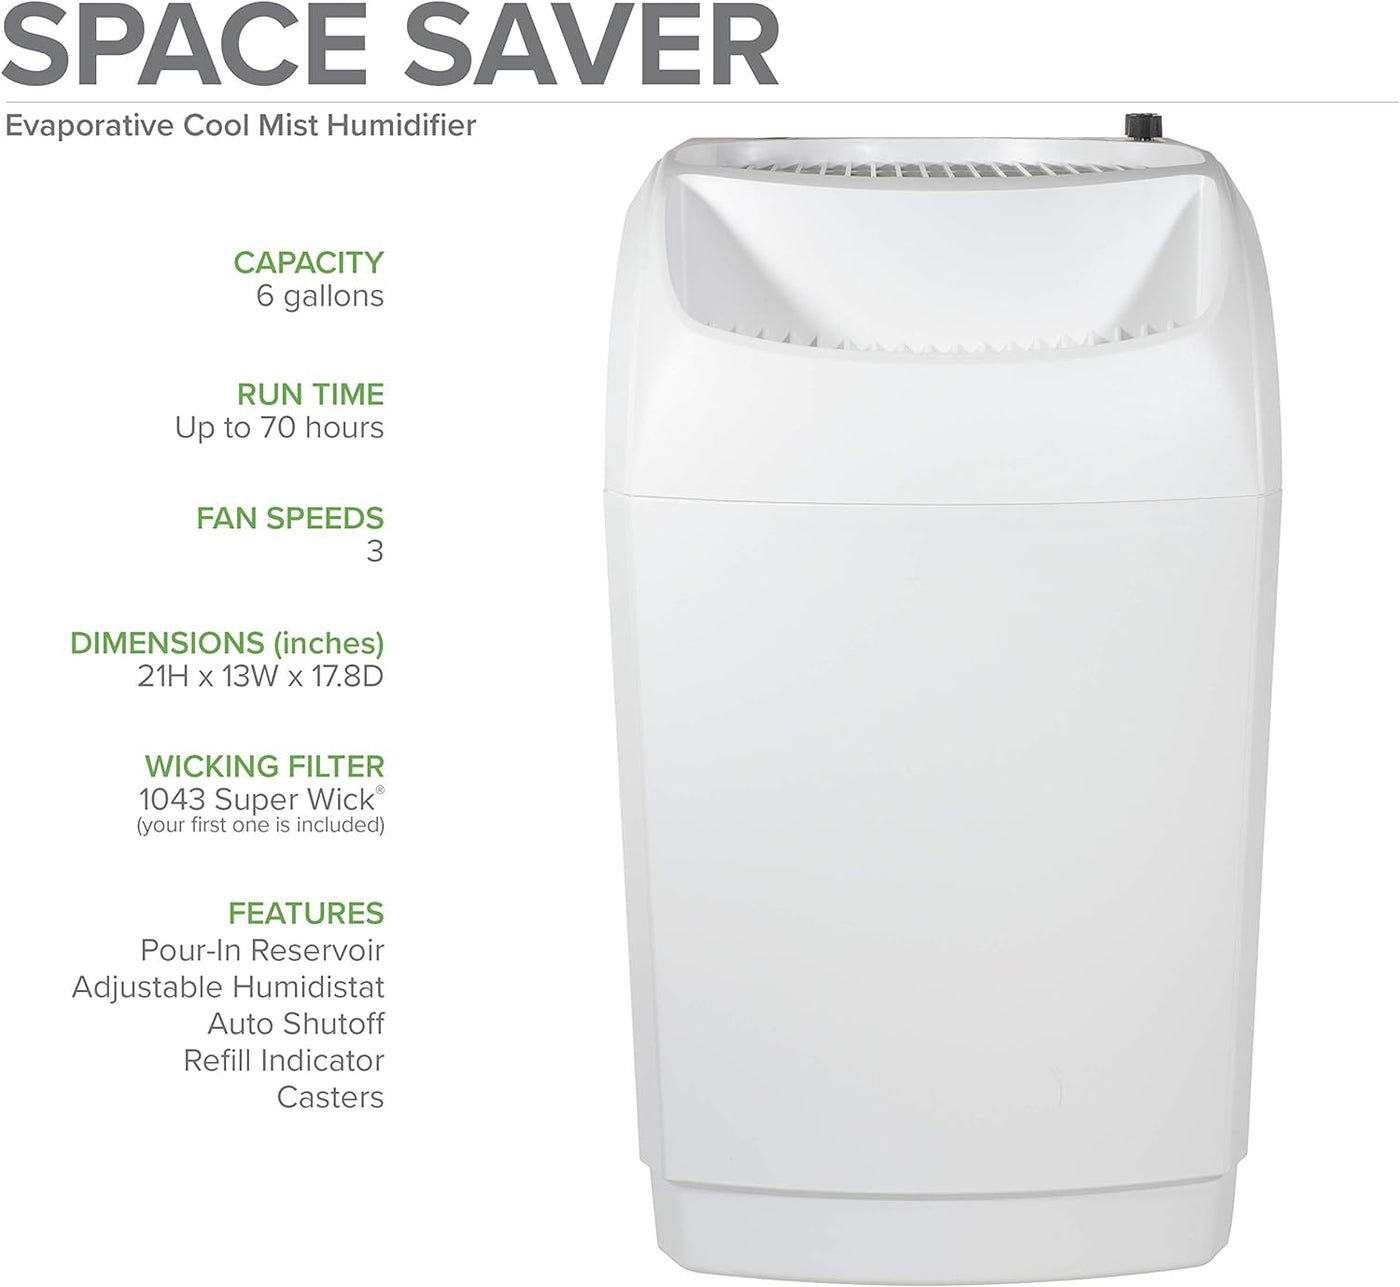 AIRCARE Space-Saver Evaporative Whole House Humidifier (2,300 sq ft) - $70